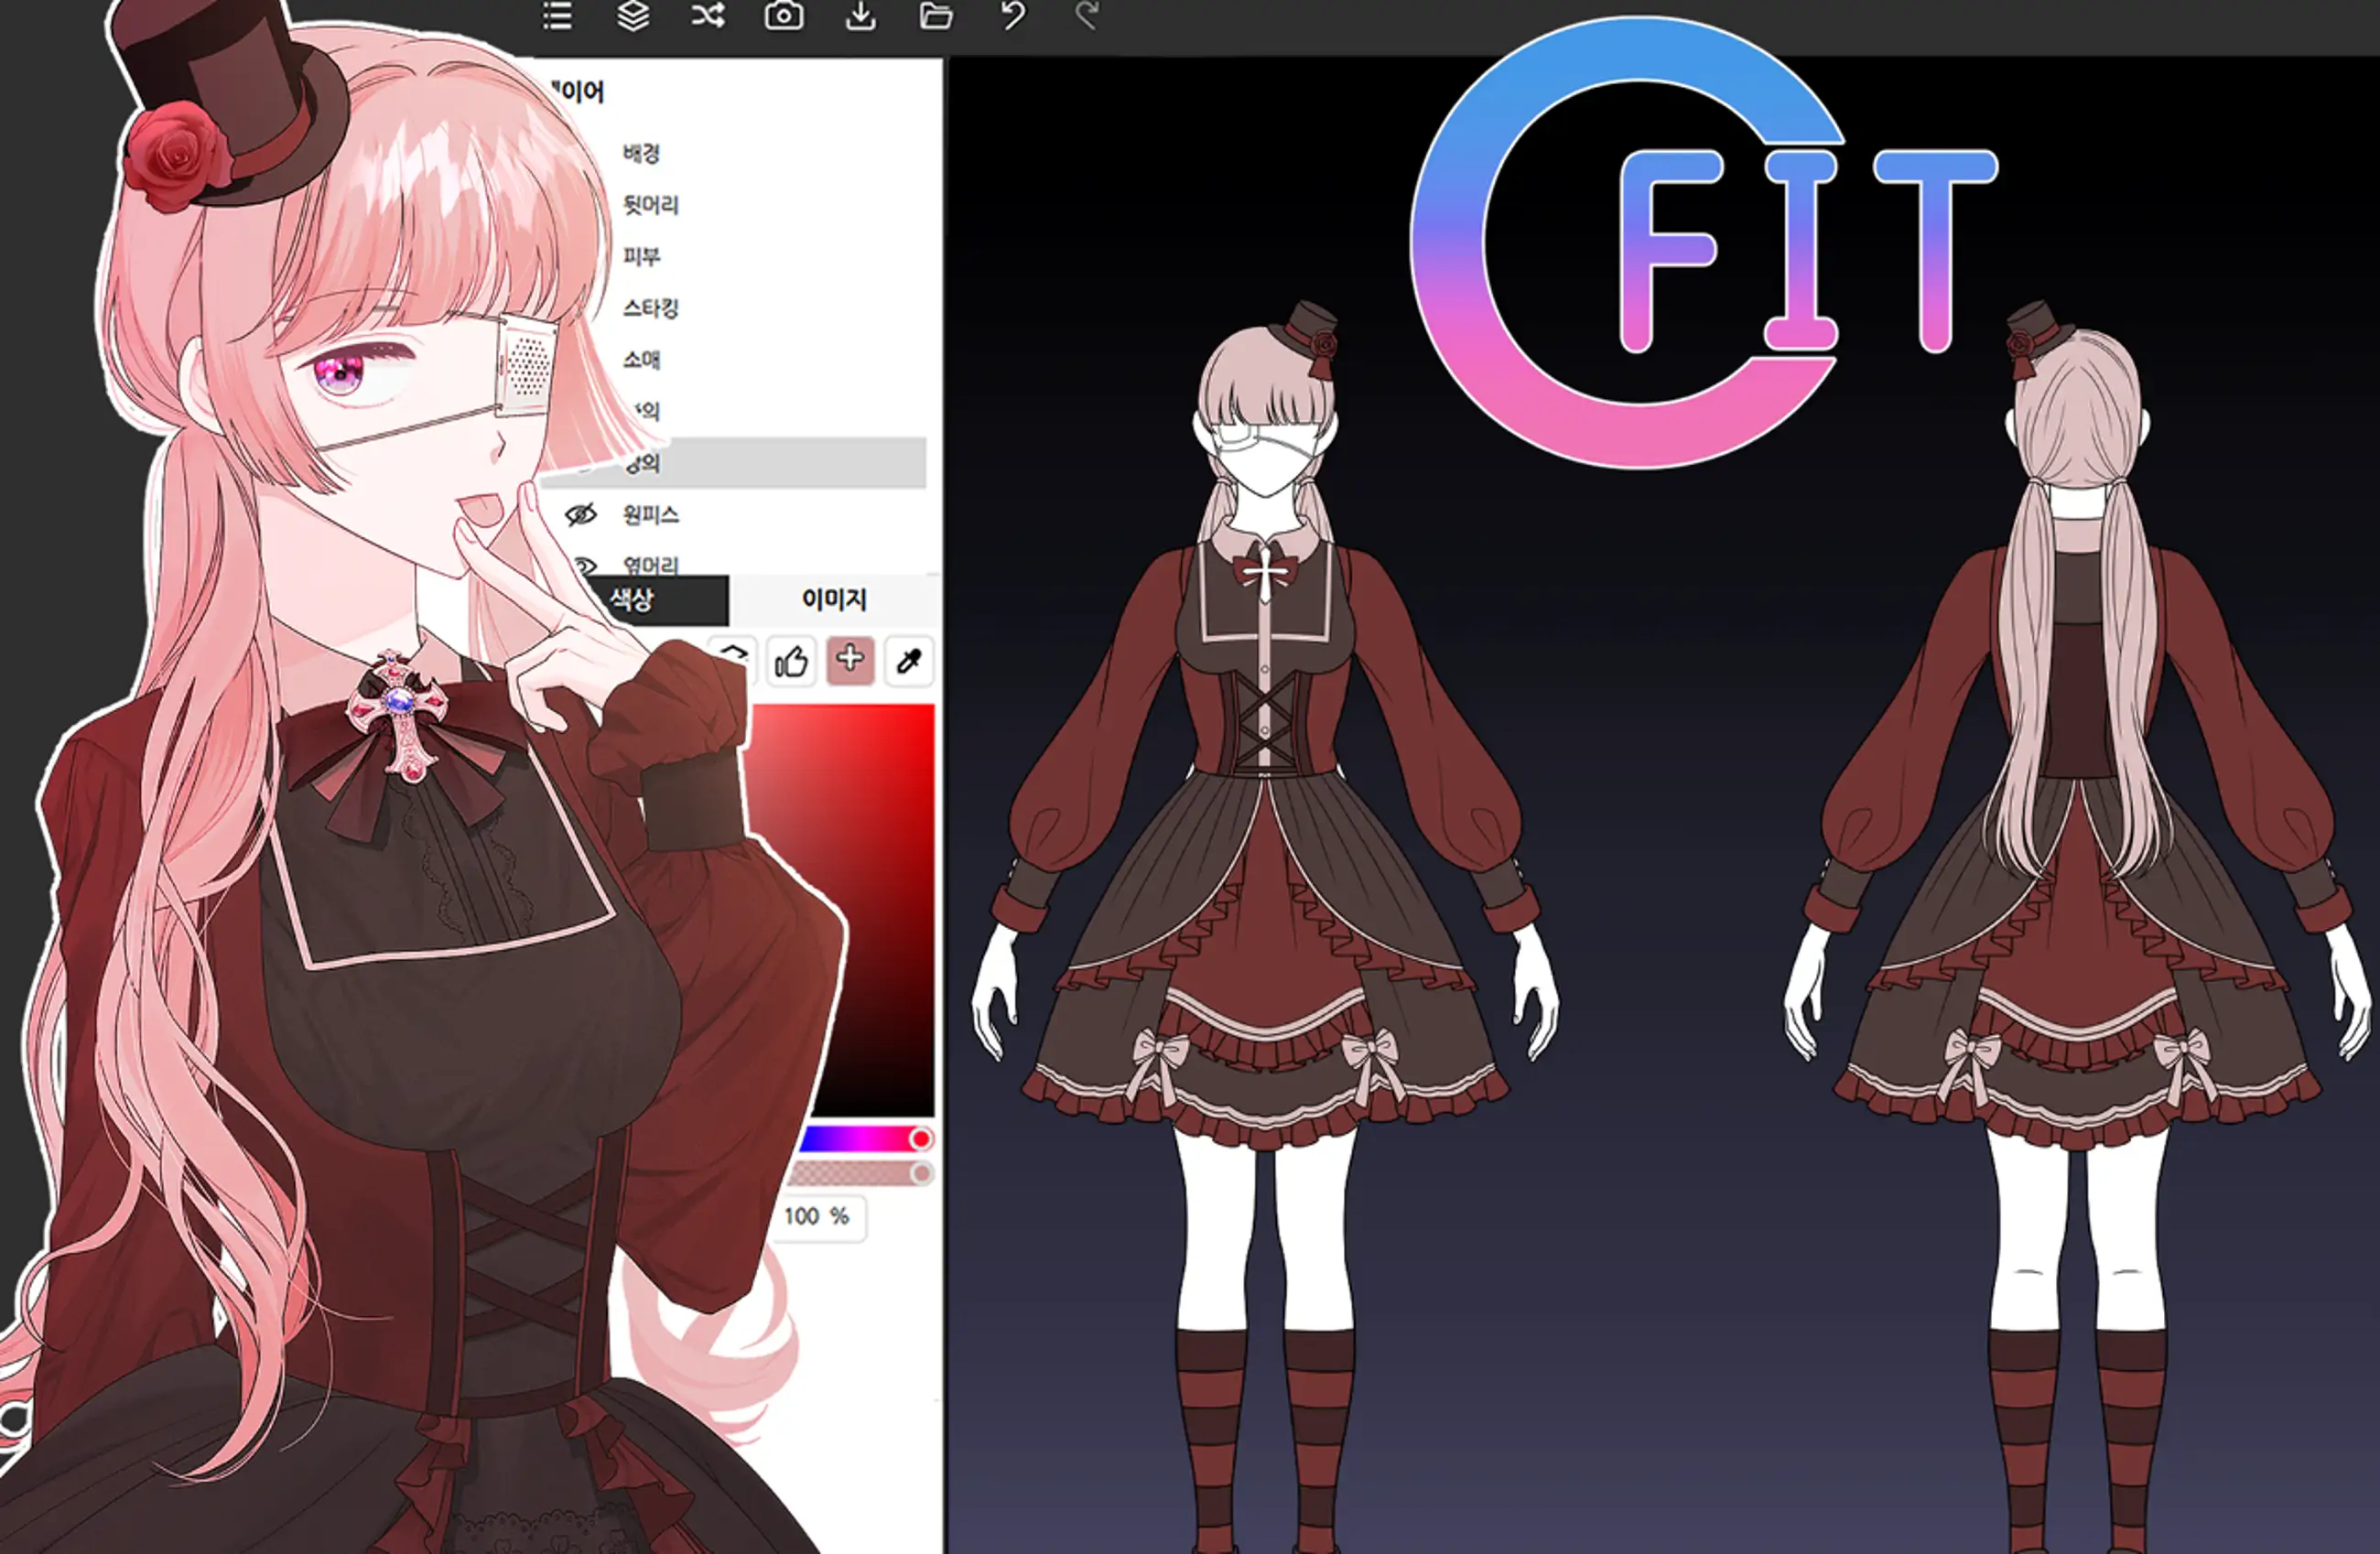 It's a program to dress up all genres. [OTFIT]